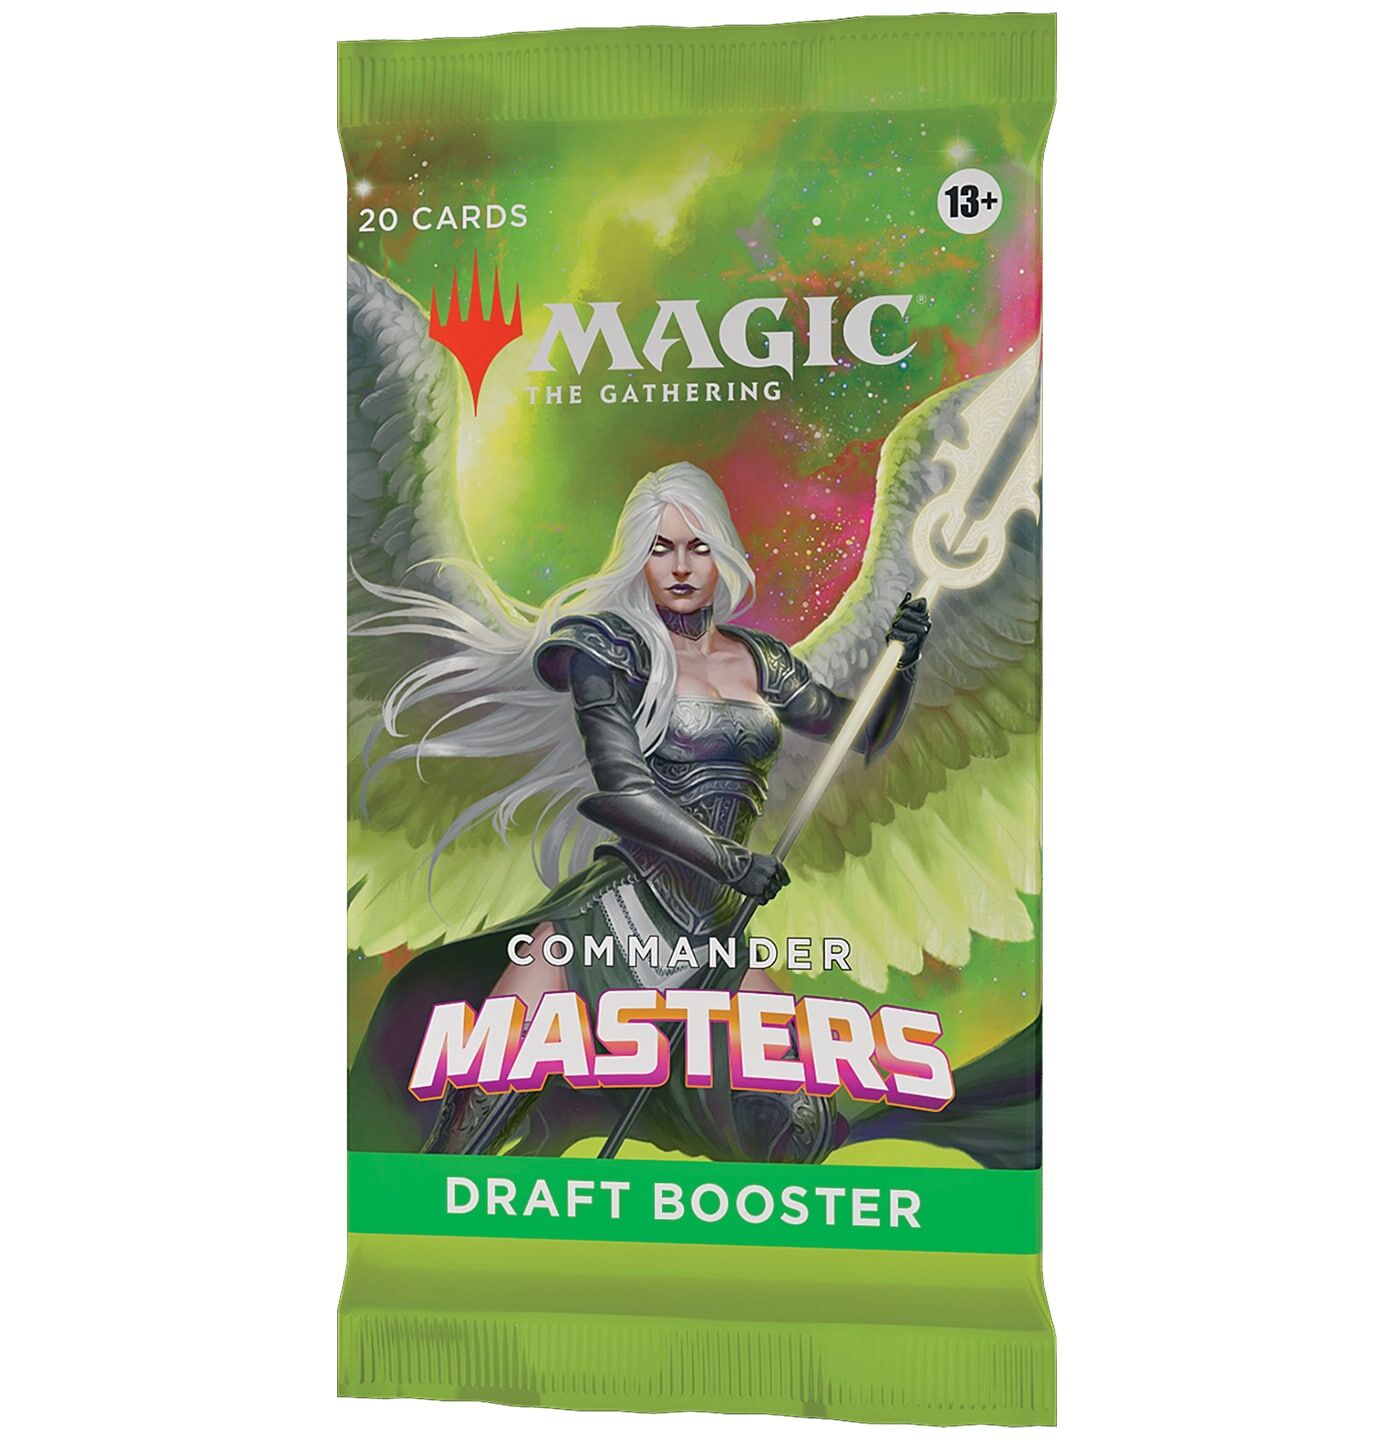 Commander Masters Draft Booster - Magic the Gathering - EN